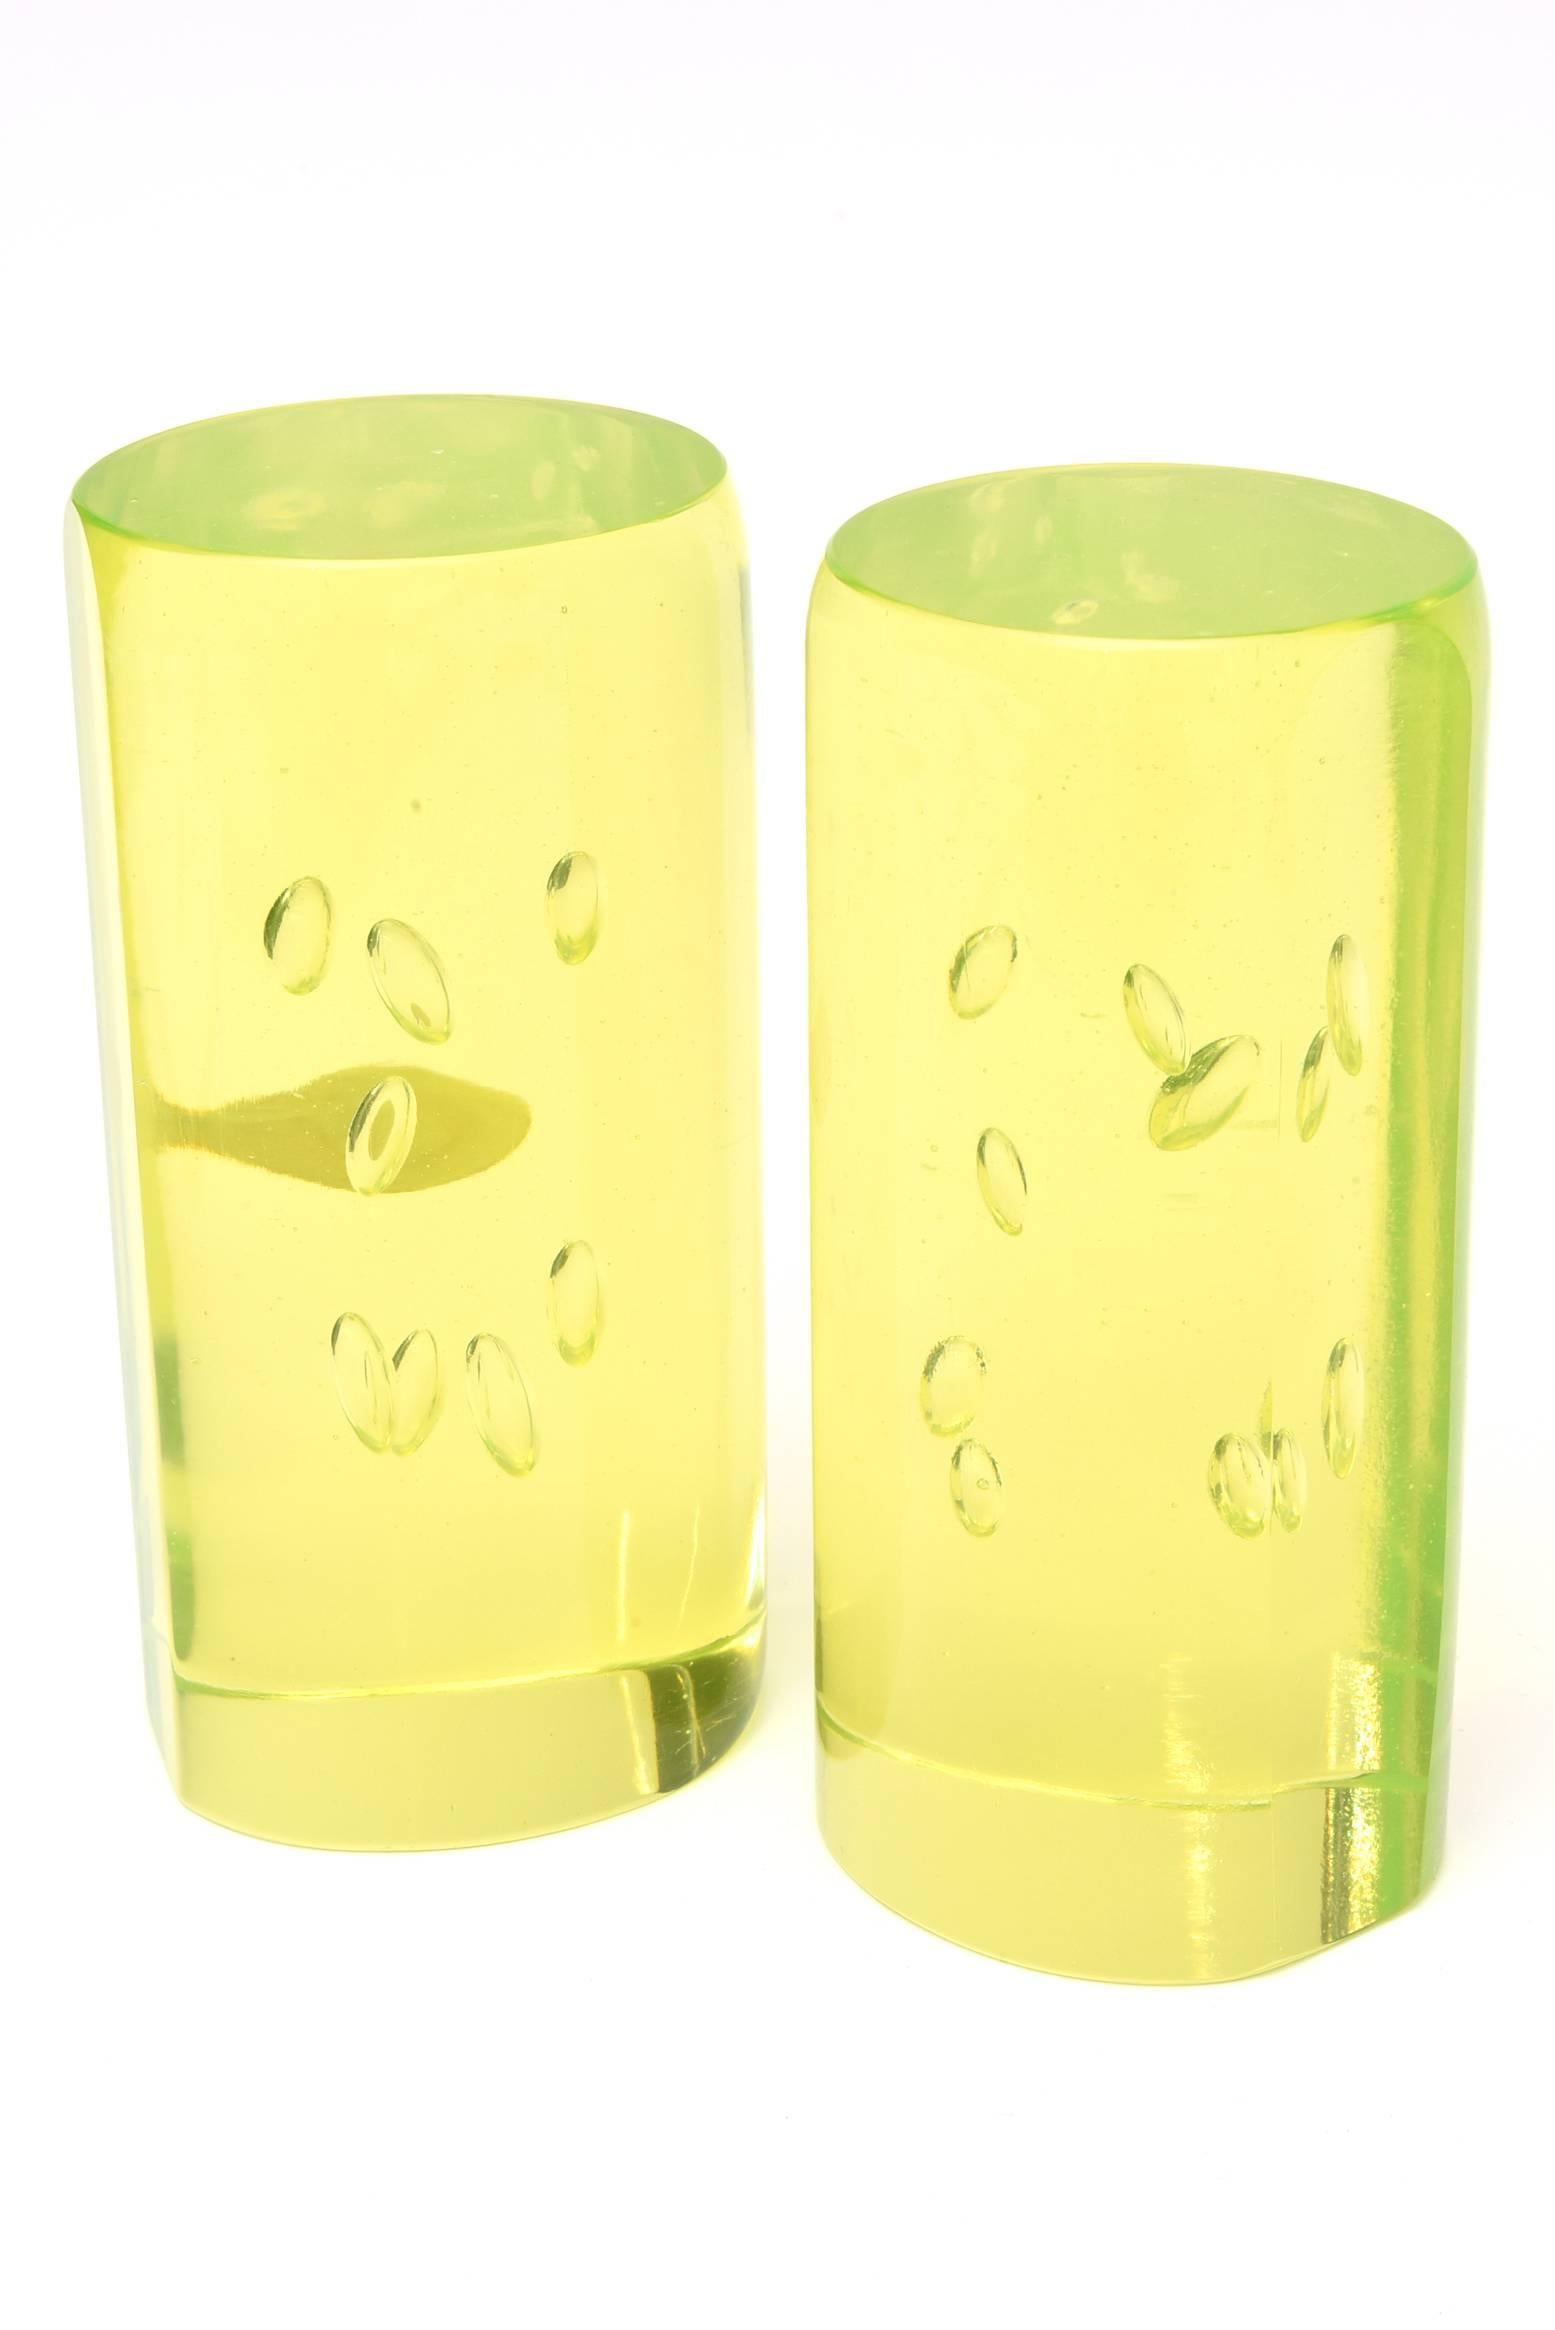 Murano Cenedese Chartreuse Yellow Bullecante Glass Bookends Pair of Vintage Rare 1